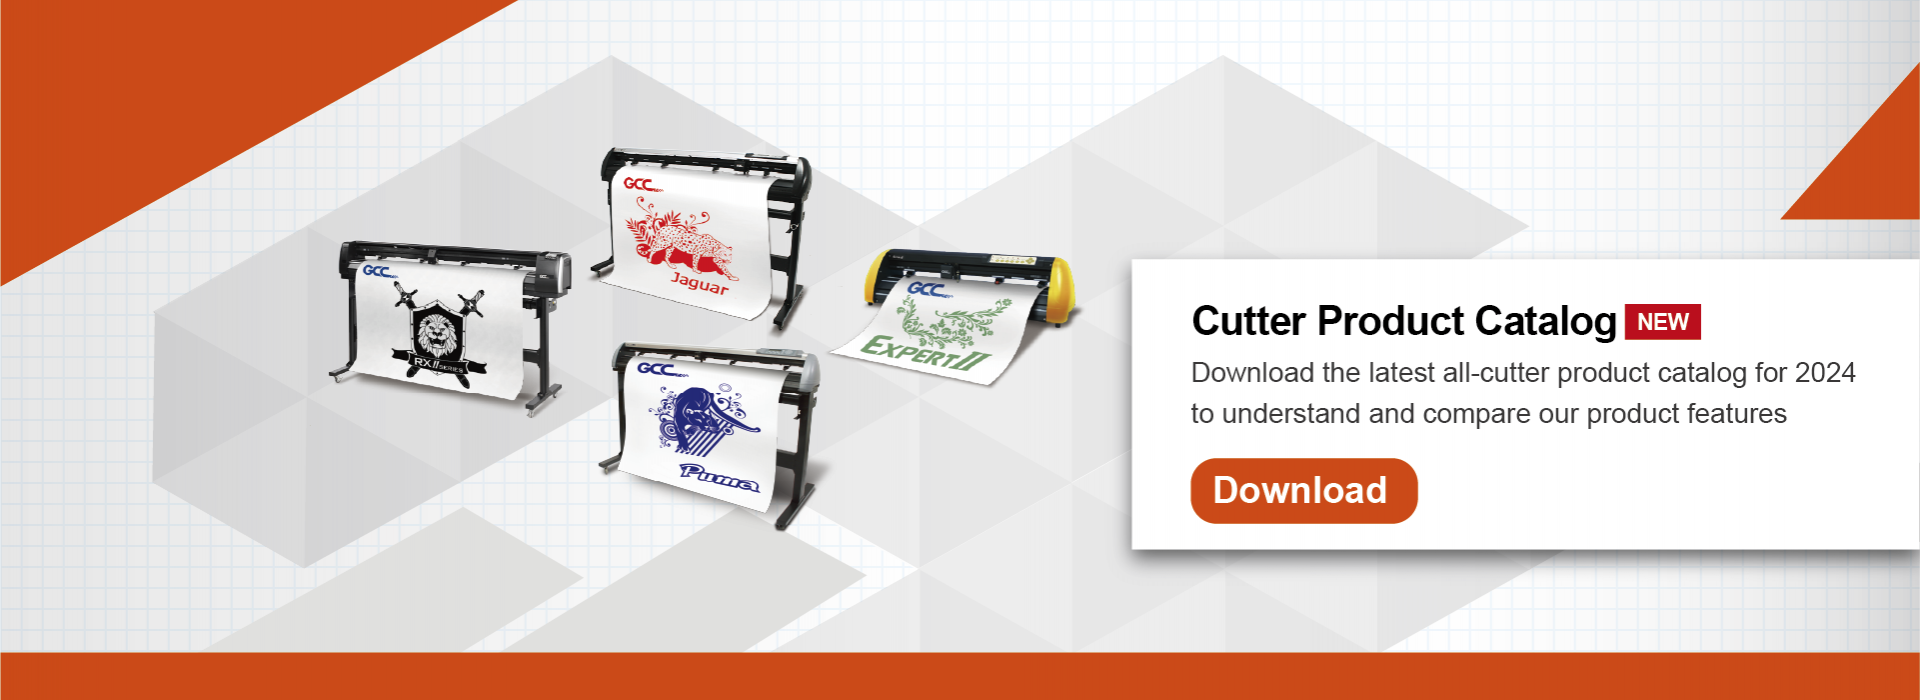 Cutter Product Catalog